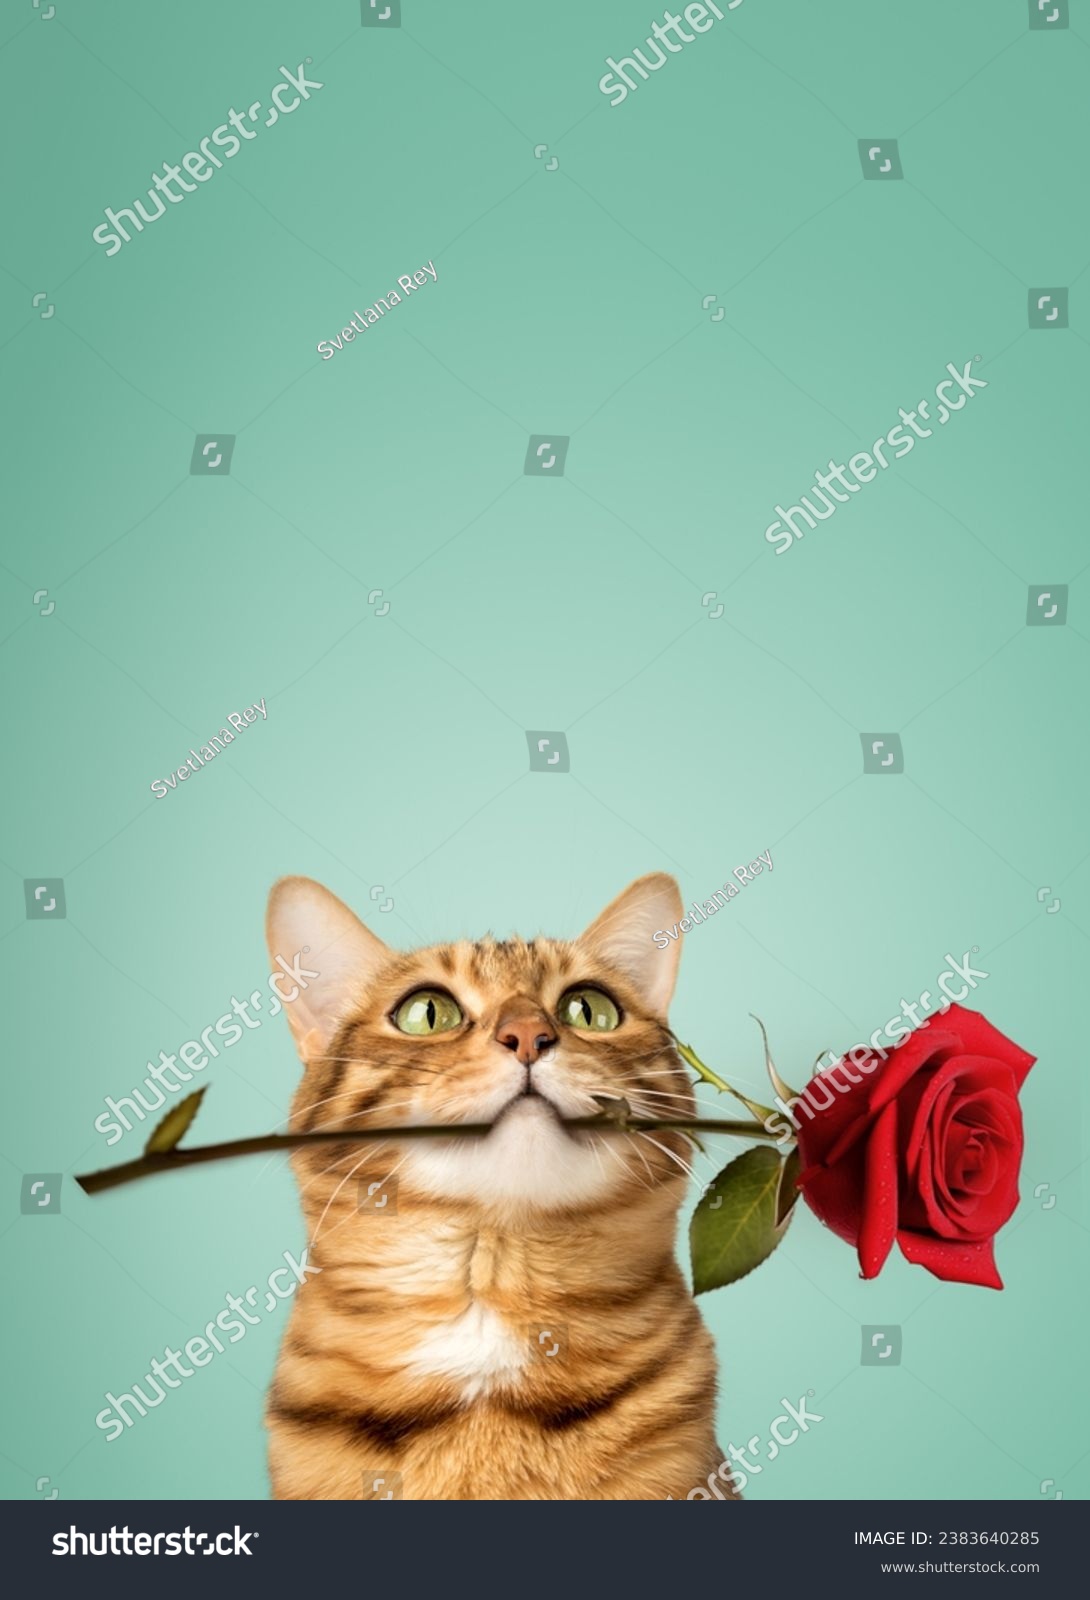 Charming Bengal cat with a rose in his teeth on a colored background. Copy space. #2383640285